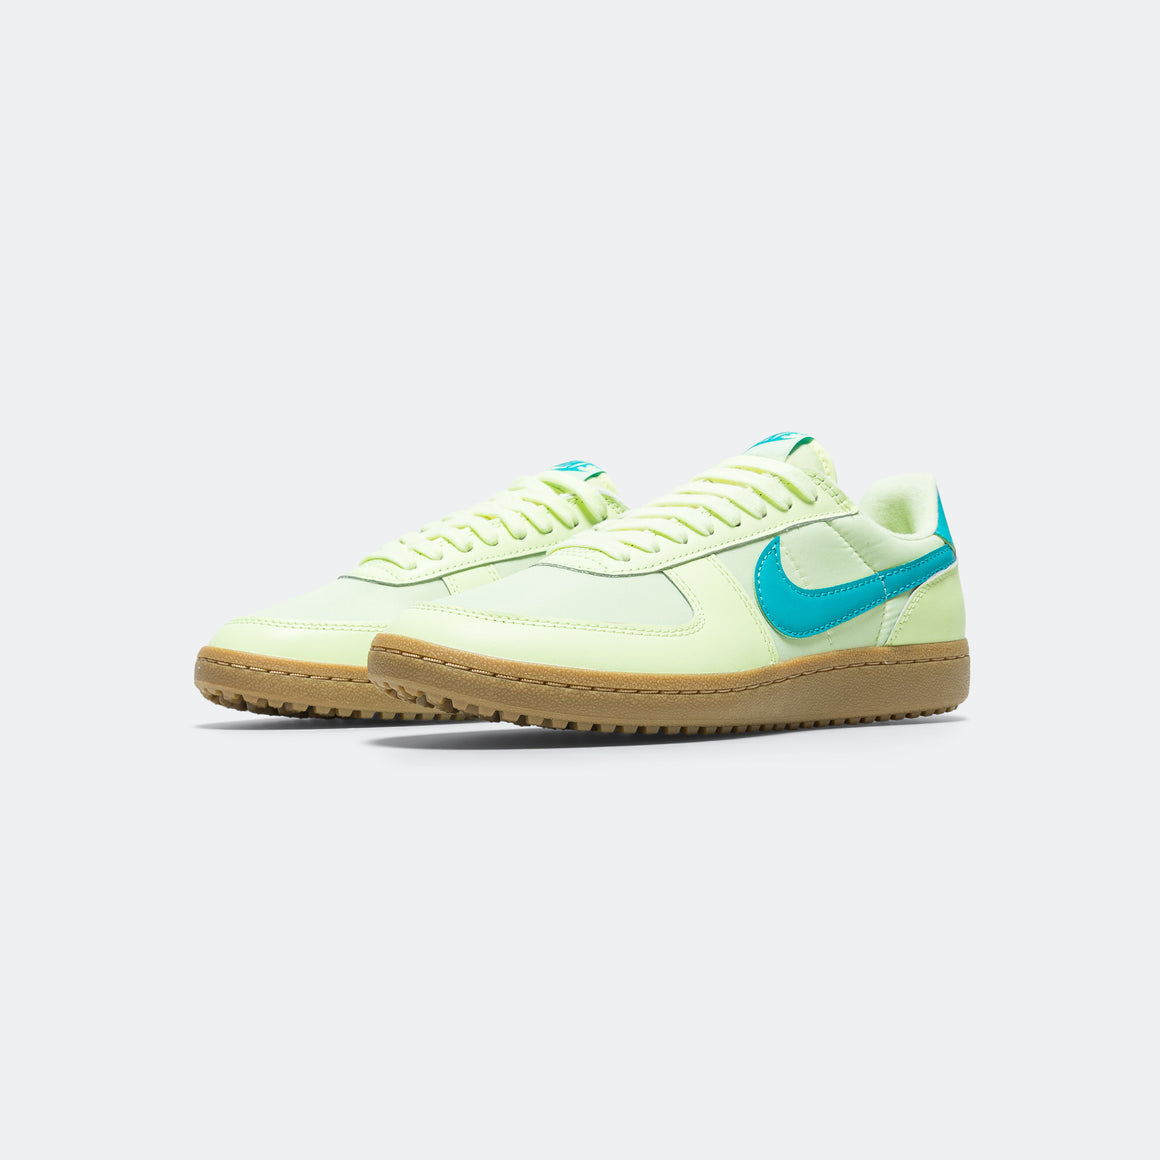 Nike - Womens Field General 82 SP - Barely Volt/Dusty Cactus-Gum - UP THERE